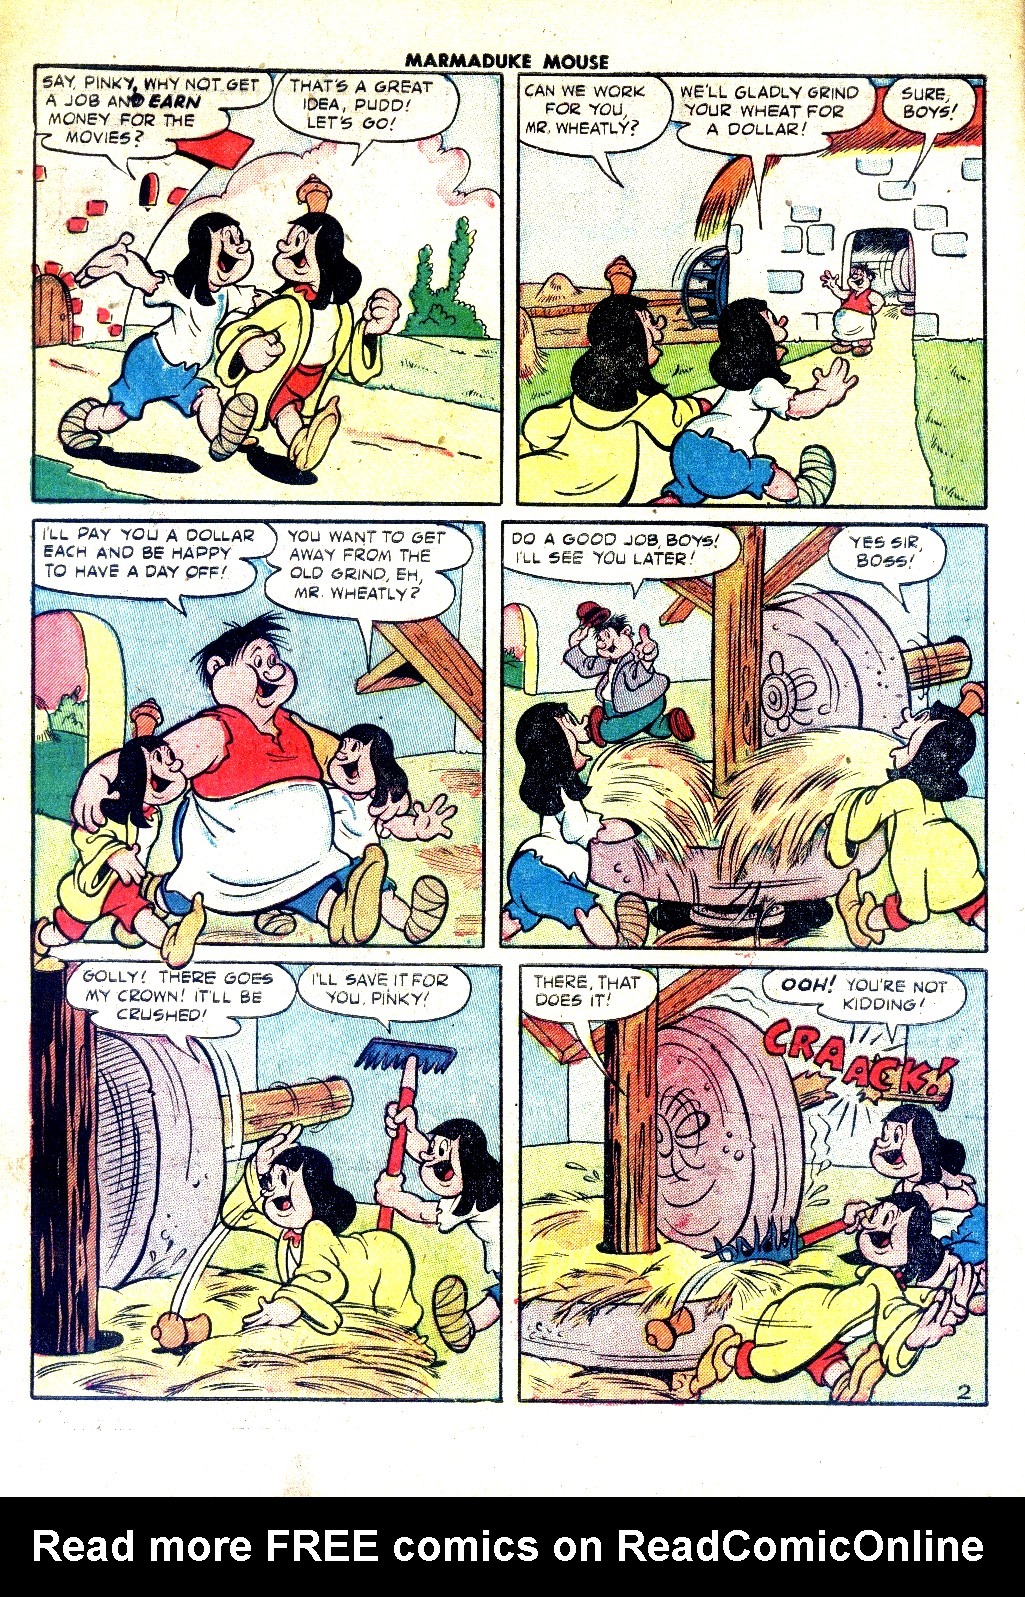 Read online Marmaduke Mouse comic -  Issue #43 - 10